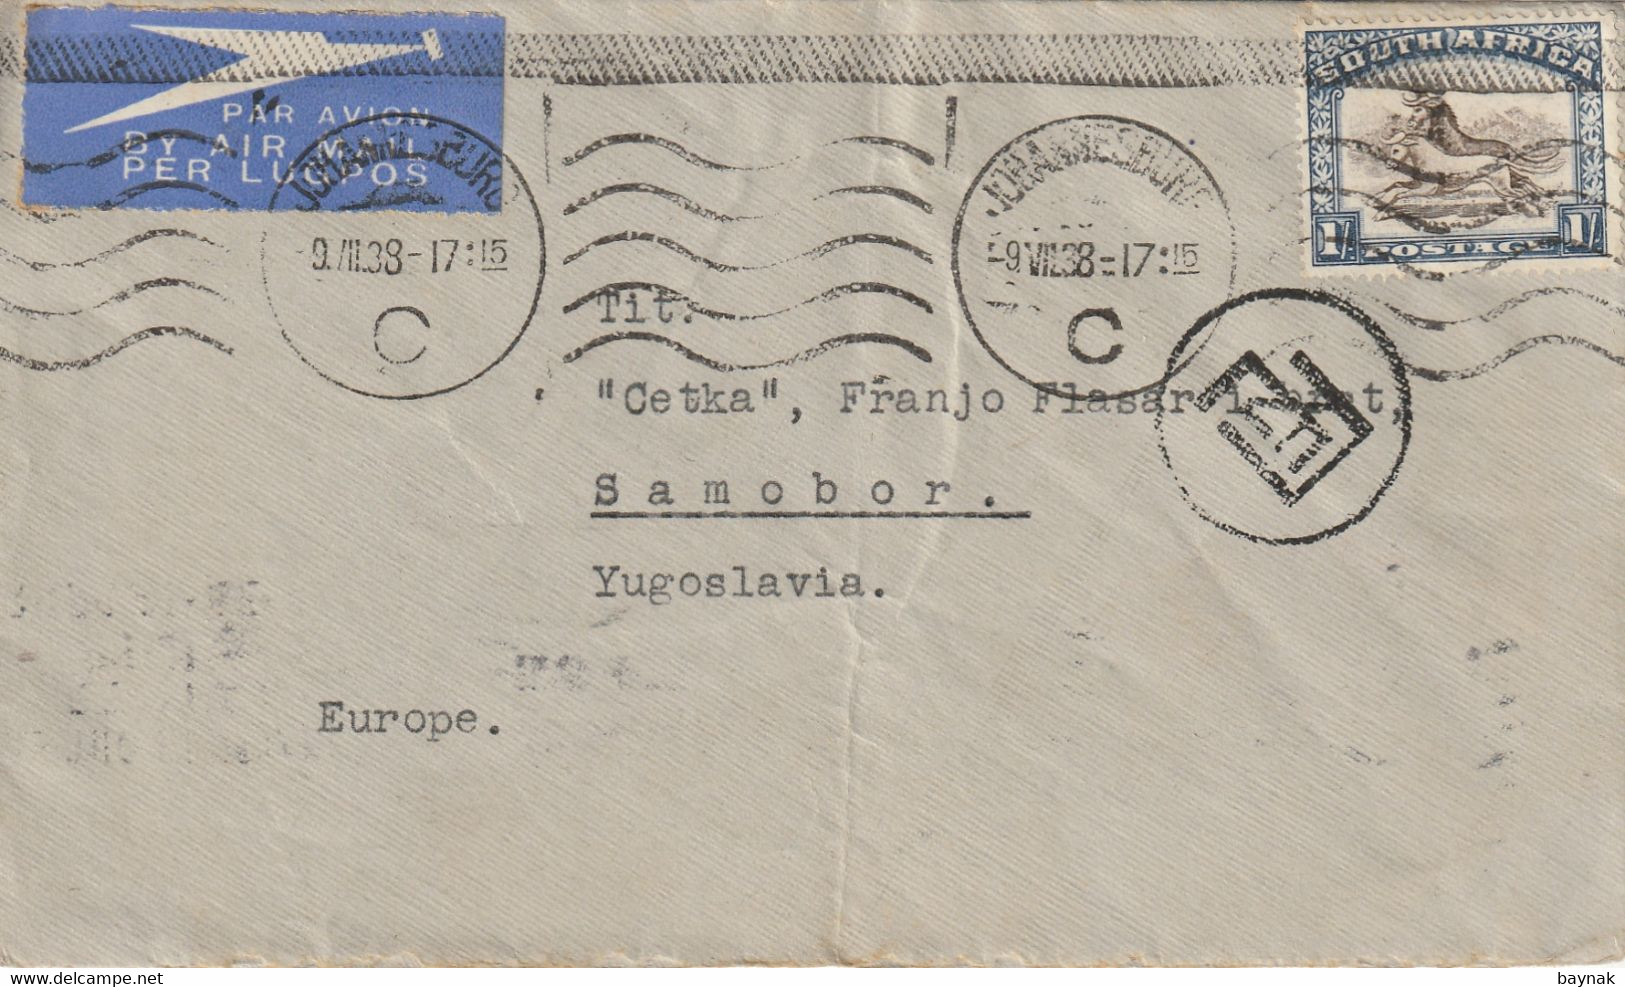 SOUTH   AFRICA  --  BRIEF  --   BY AIR MAIL  --   1938  --  JOHANNESBURG  TO ZAGREB, CROATIA - Luchtpost